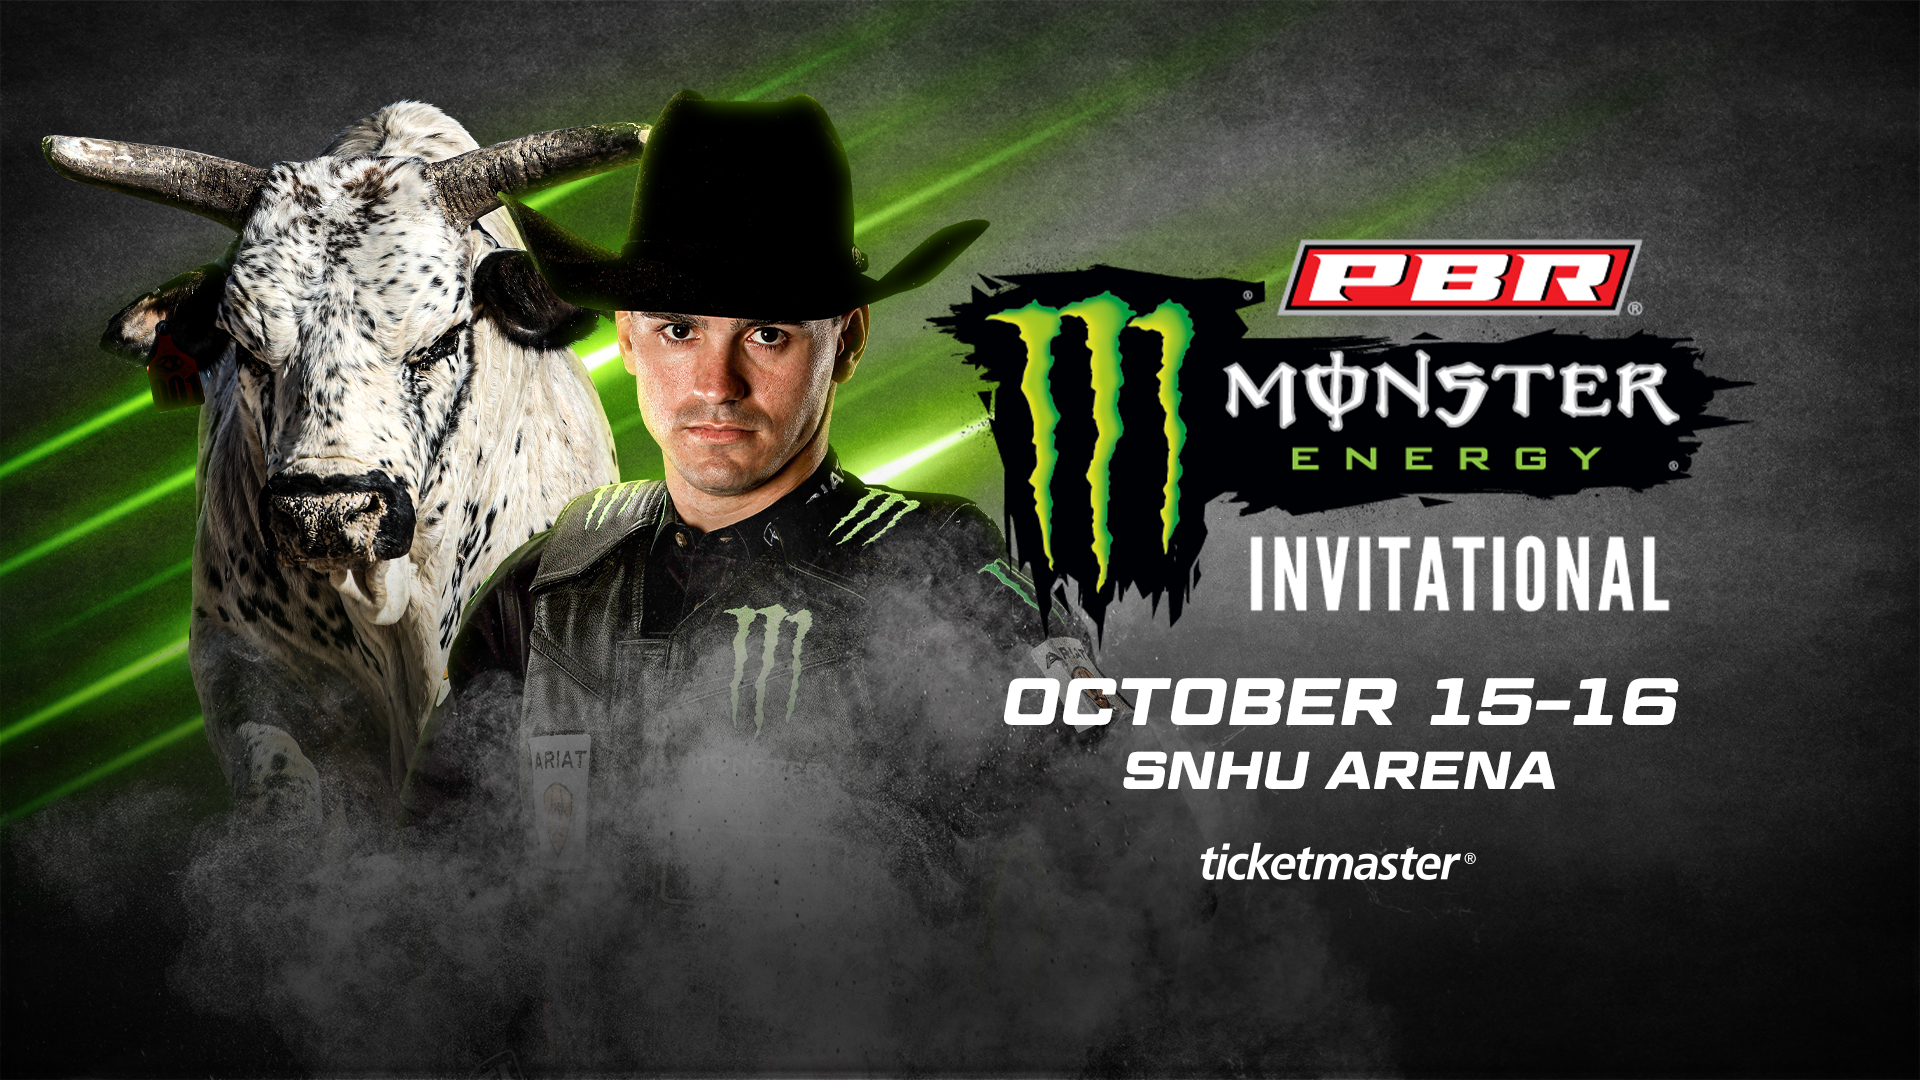 Win Your Way In to See The Professional Bull Riders Tour at SNHU Arena